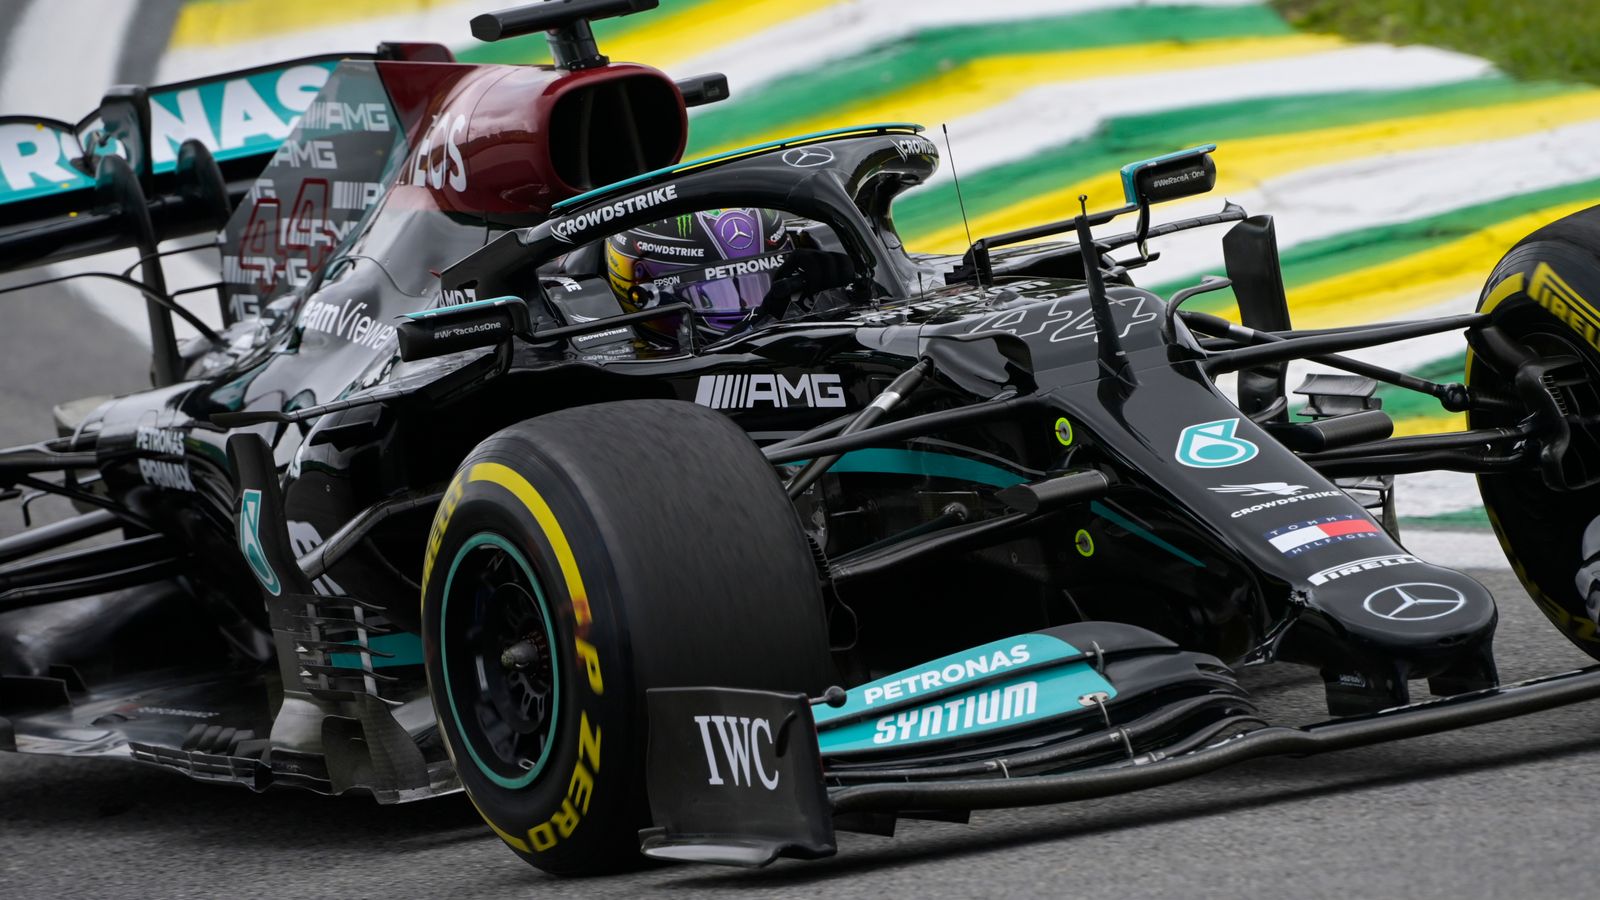 Sao Paulo GP: Lewis Hamilton takes fastest Practice One time and grid penalty as Max Verstappen qualifying battle awaits